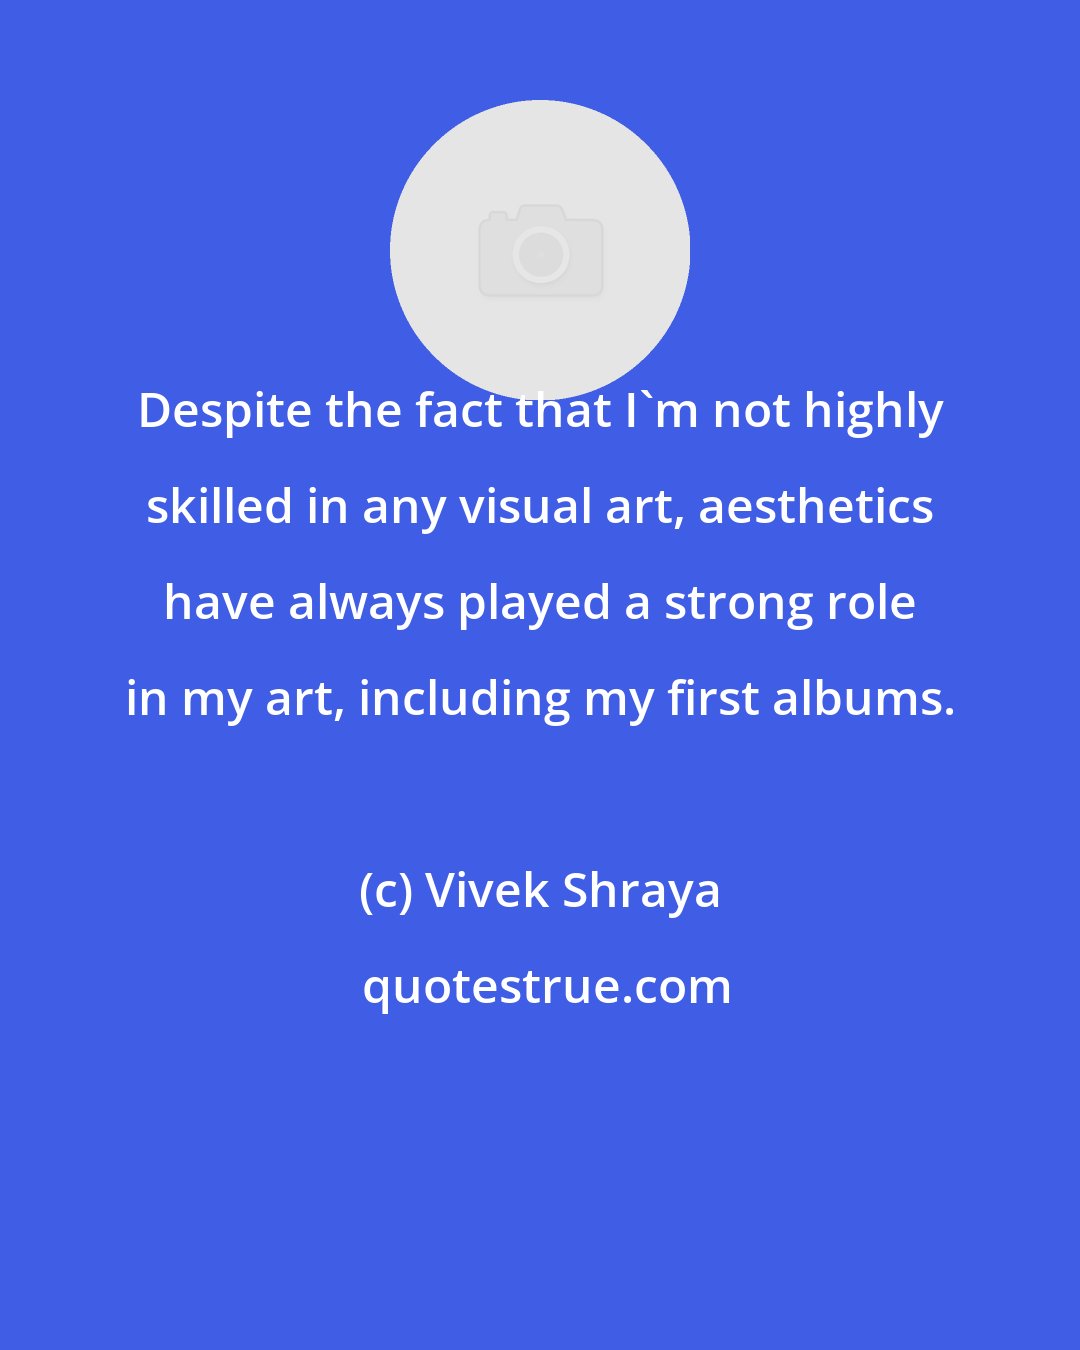 Vivek Shraya: Despite the fact that I'm not highly skilled in any visual art, aesthetics have always played a strong role in my art, including my first albums.